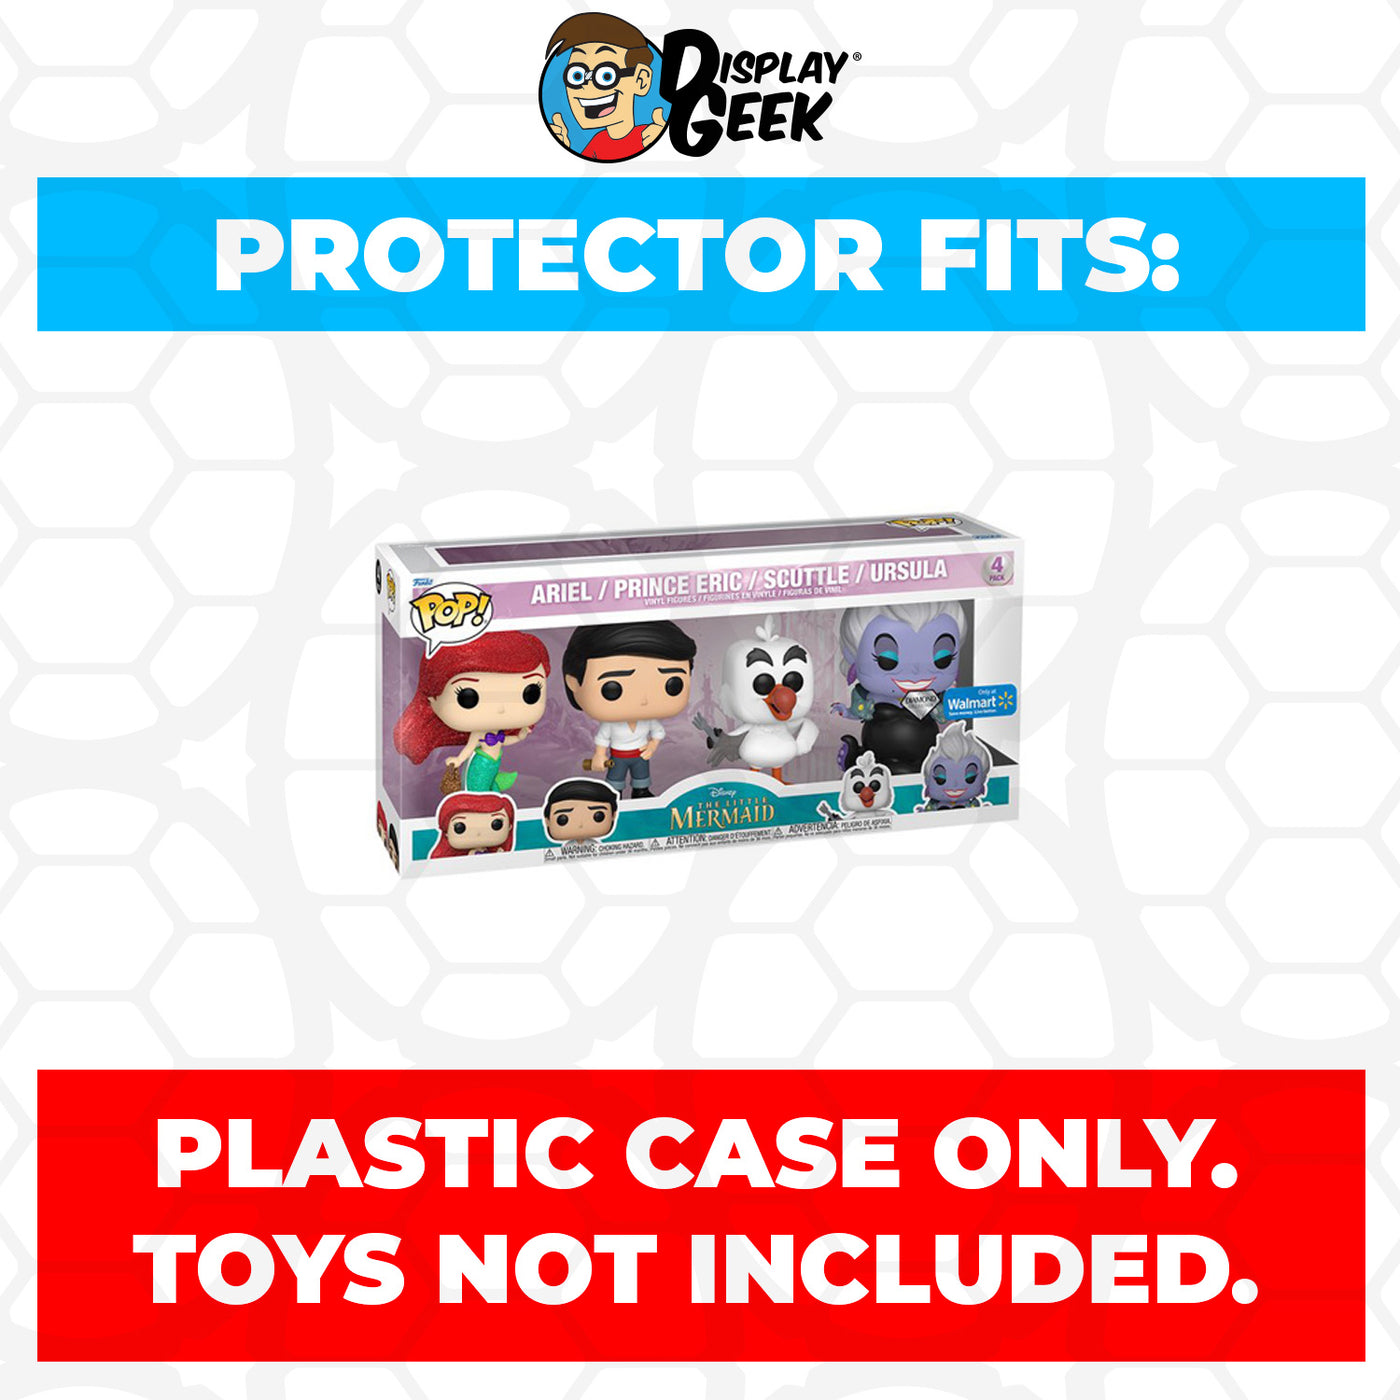 Pop Protector for 4 Pack The Little Mermaid Ariel, Prince Eric, Scuttle & Ursula Diamond Walmart Exclusive Funko Pop on The Protector Guide App by Display Geek